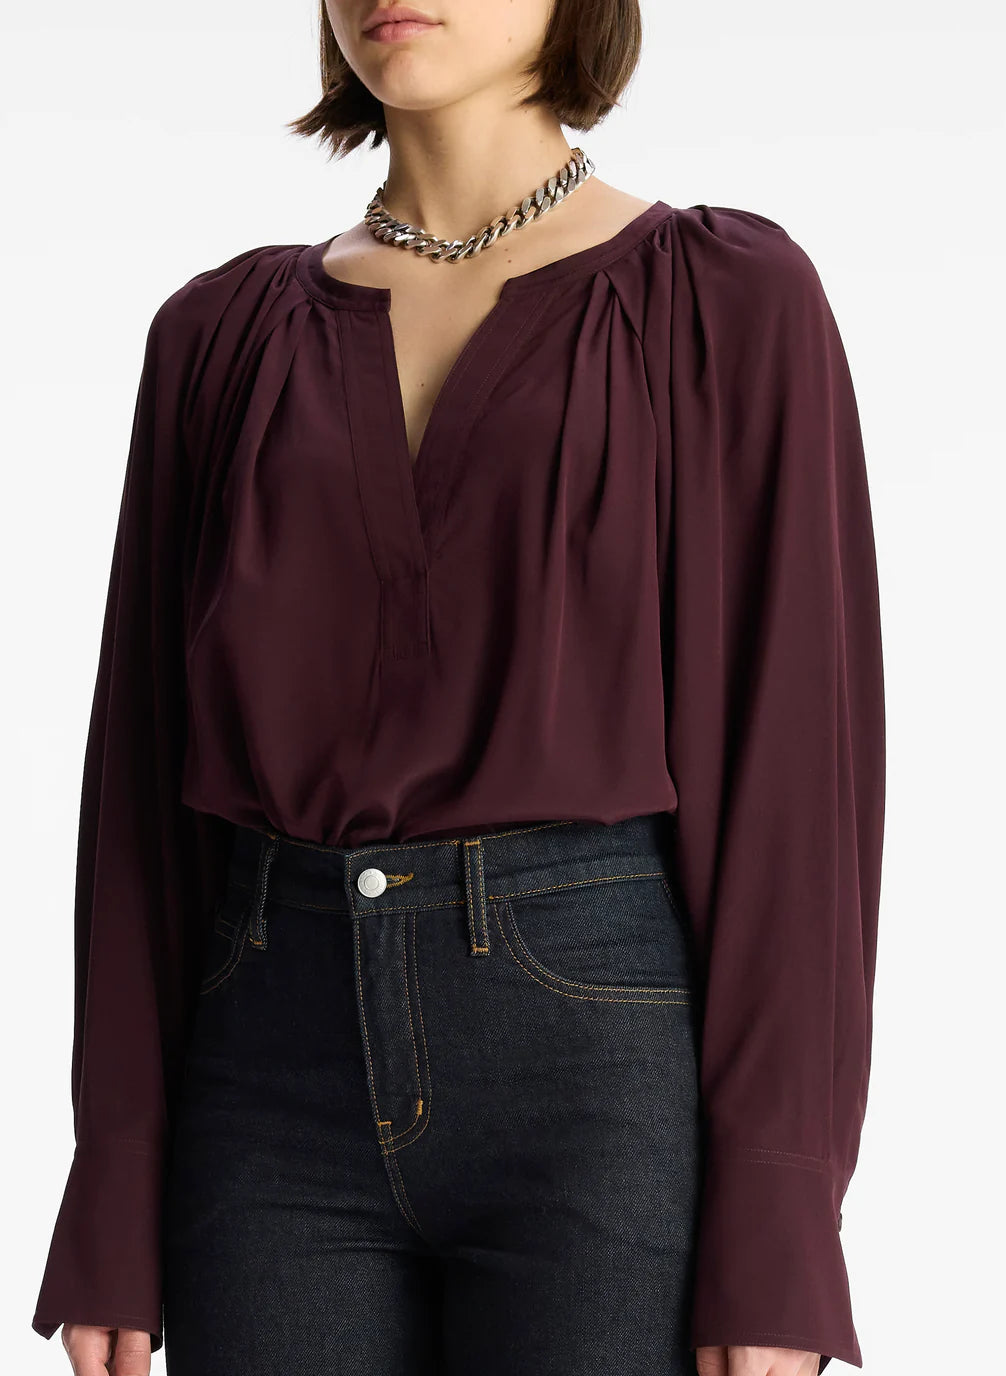 Nomad Silk Top - Chicory